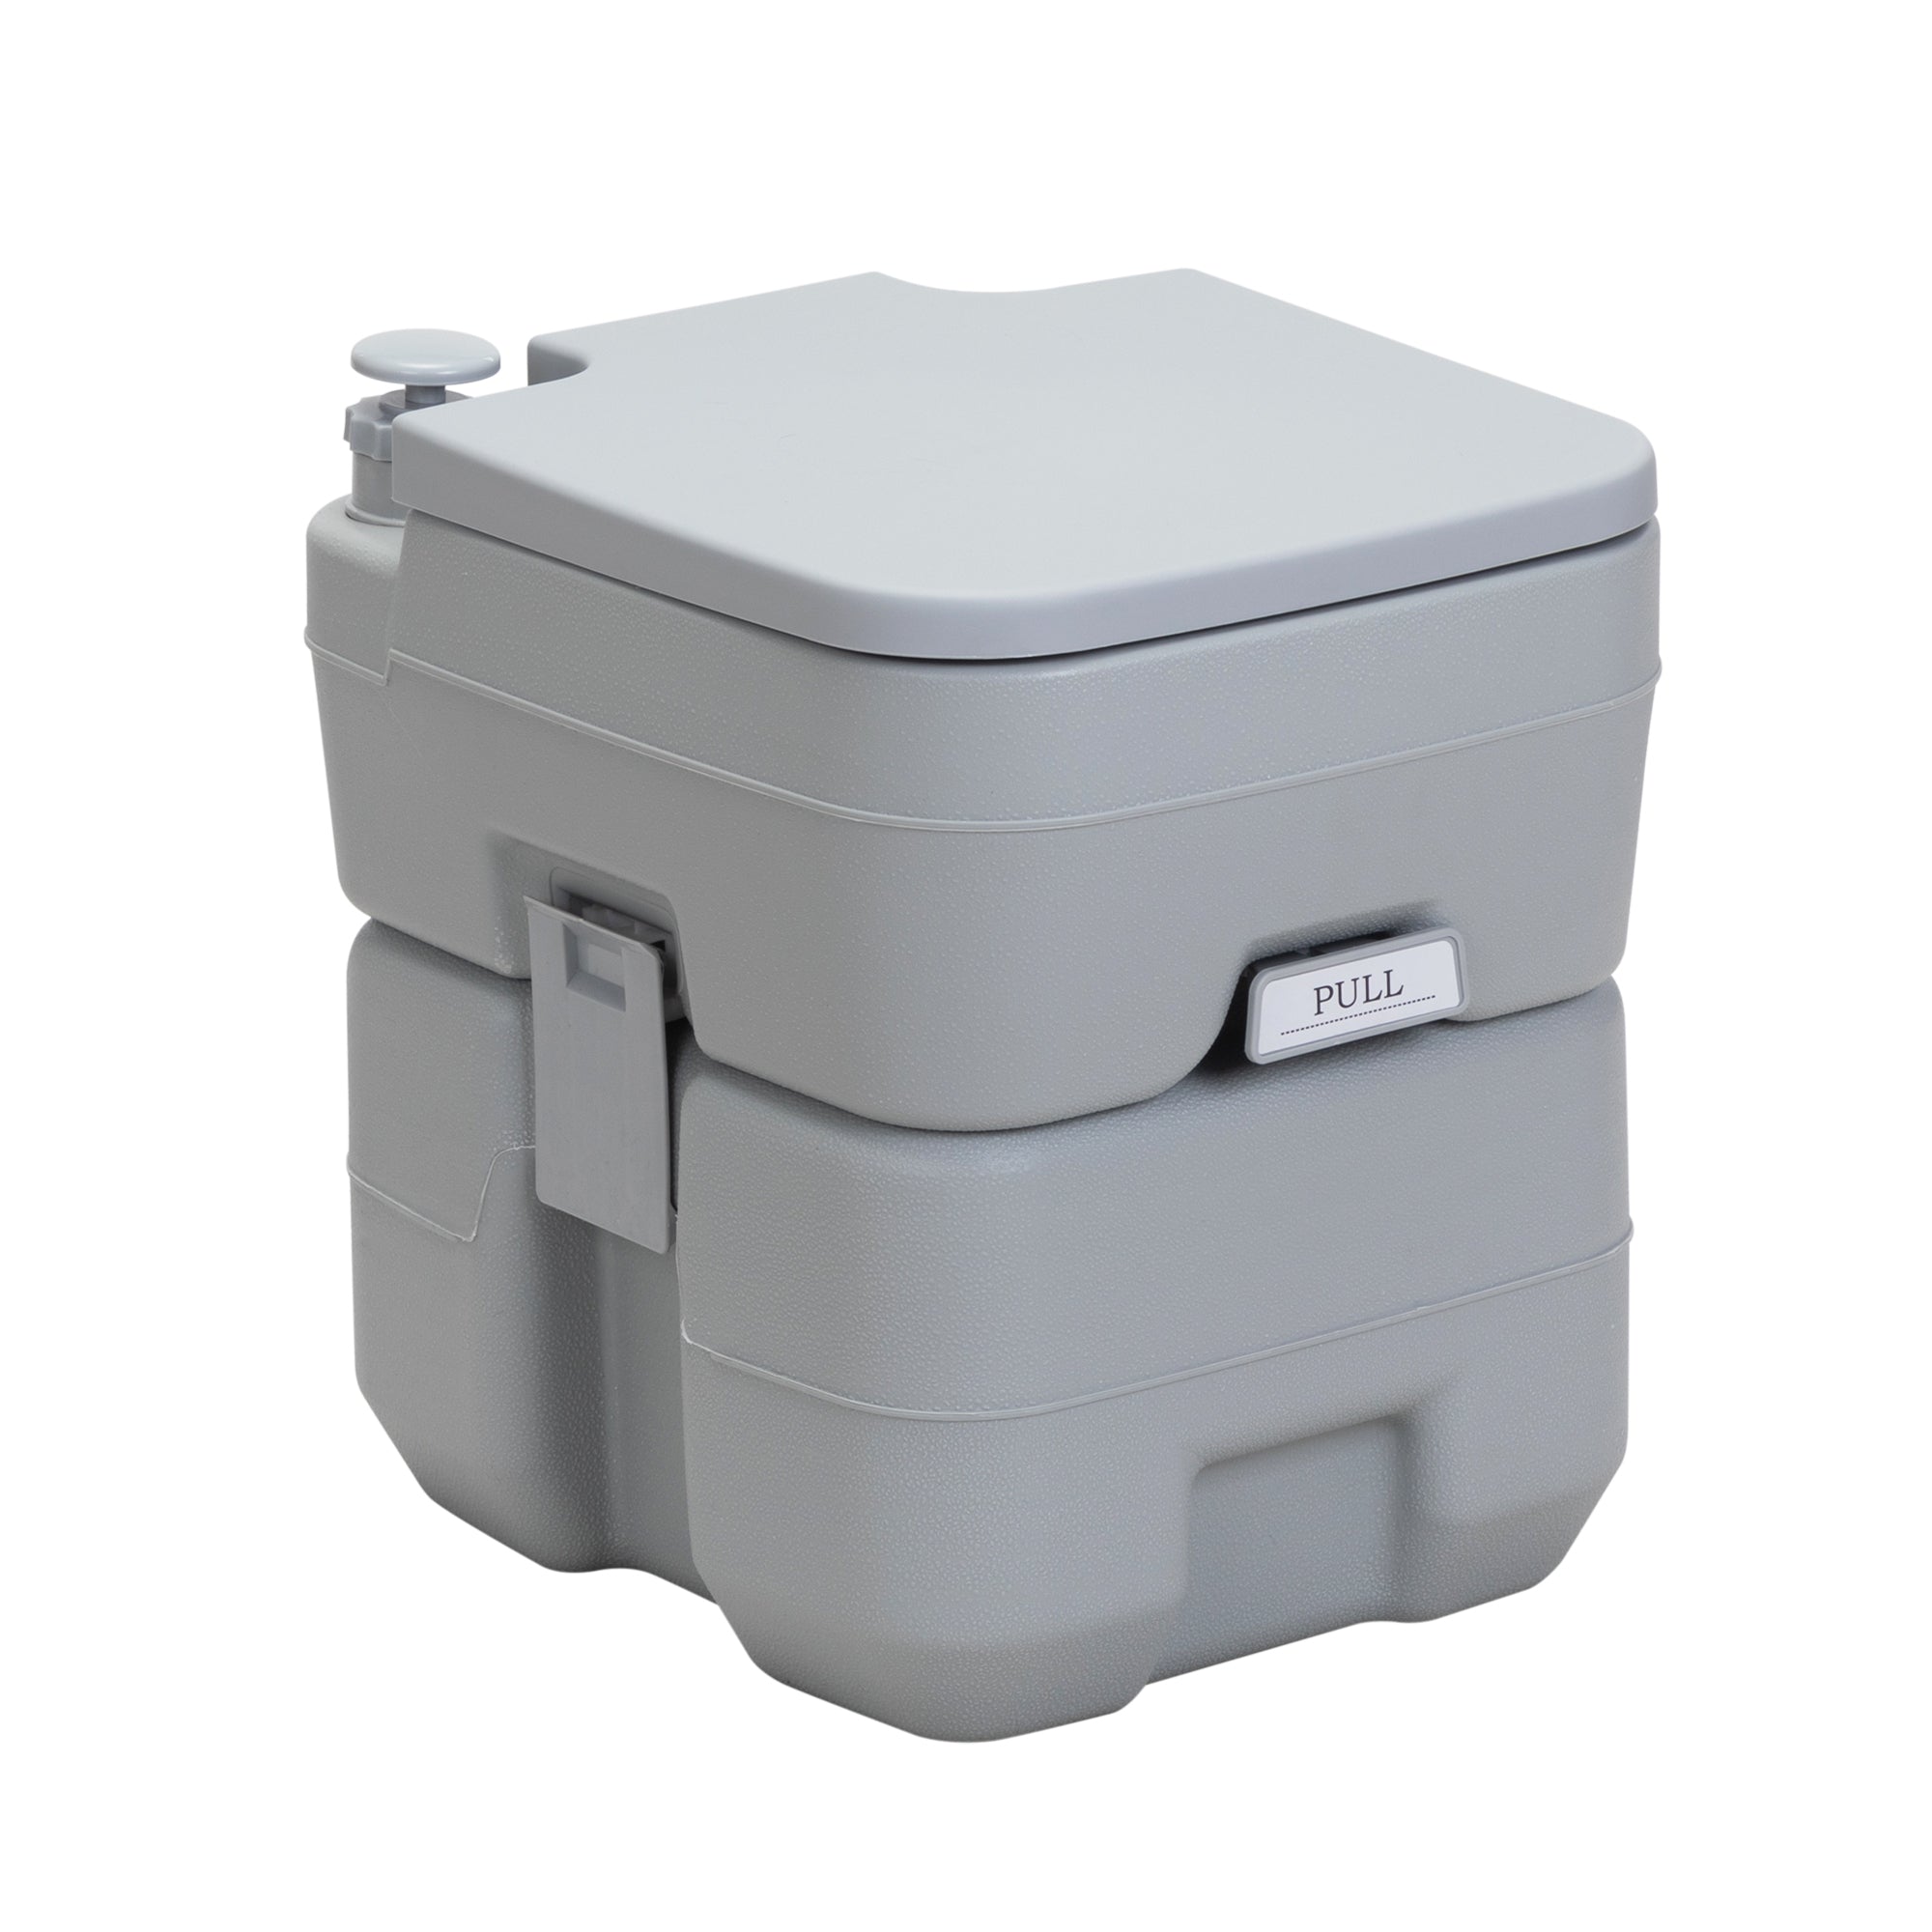 Portable Toilet With 5.3 Gallon Waste Tank and